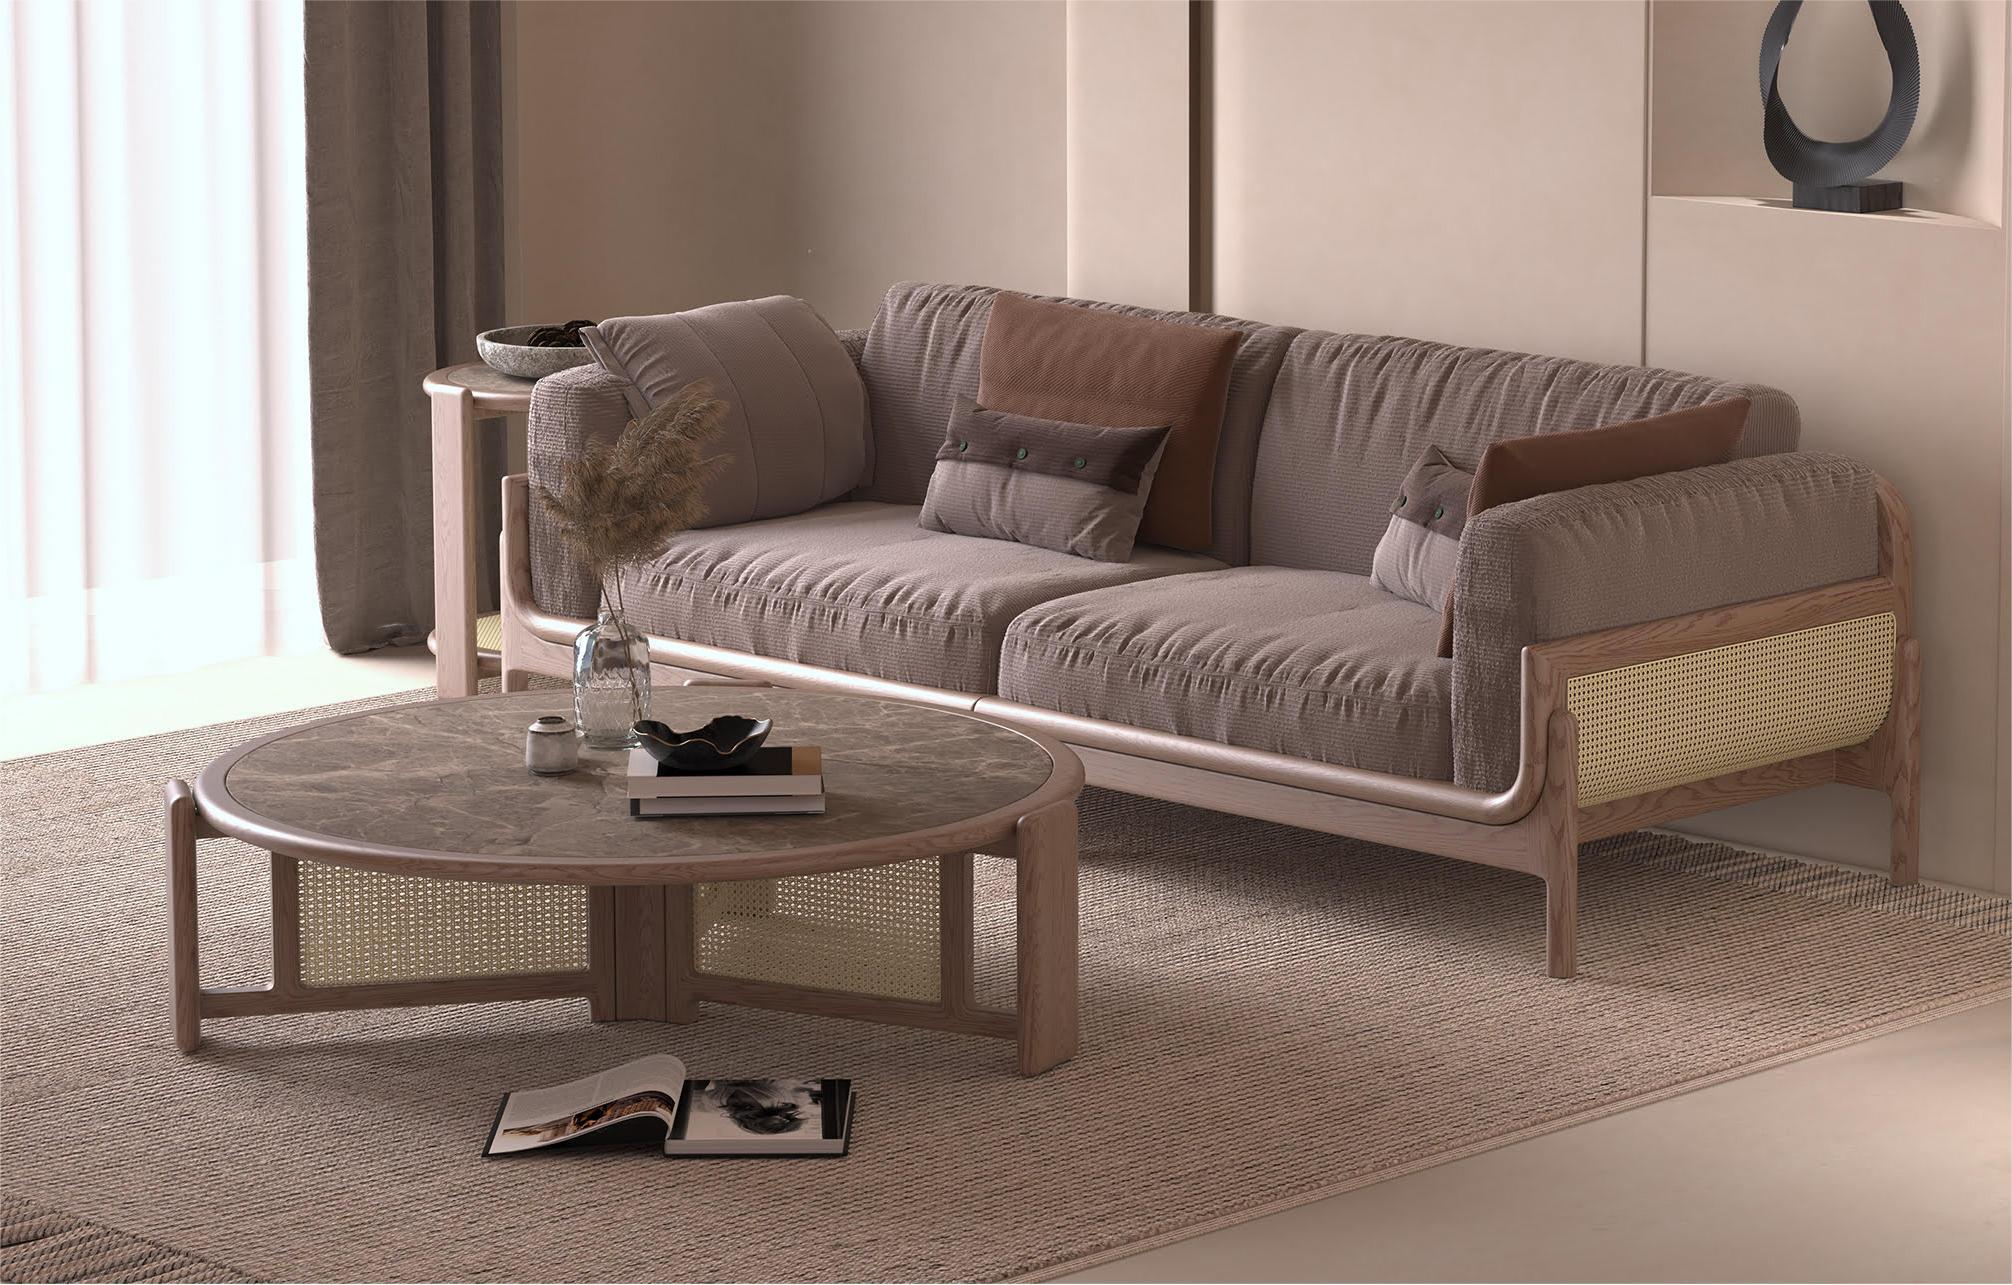 TBG-S02 three seat sofa couch Foshan furniture suppliers for Nordic modern three seat sofa couch  Foshan furniture suppliers,sofa wholesaler,couch producer,sofa factory China,Nordic sofa set suppliers,high-quality solid wood furniture supplier,contemporary nodic sofa couch supplier